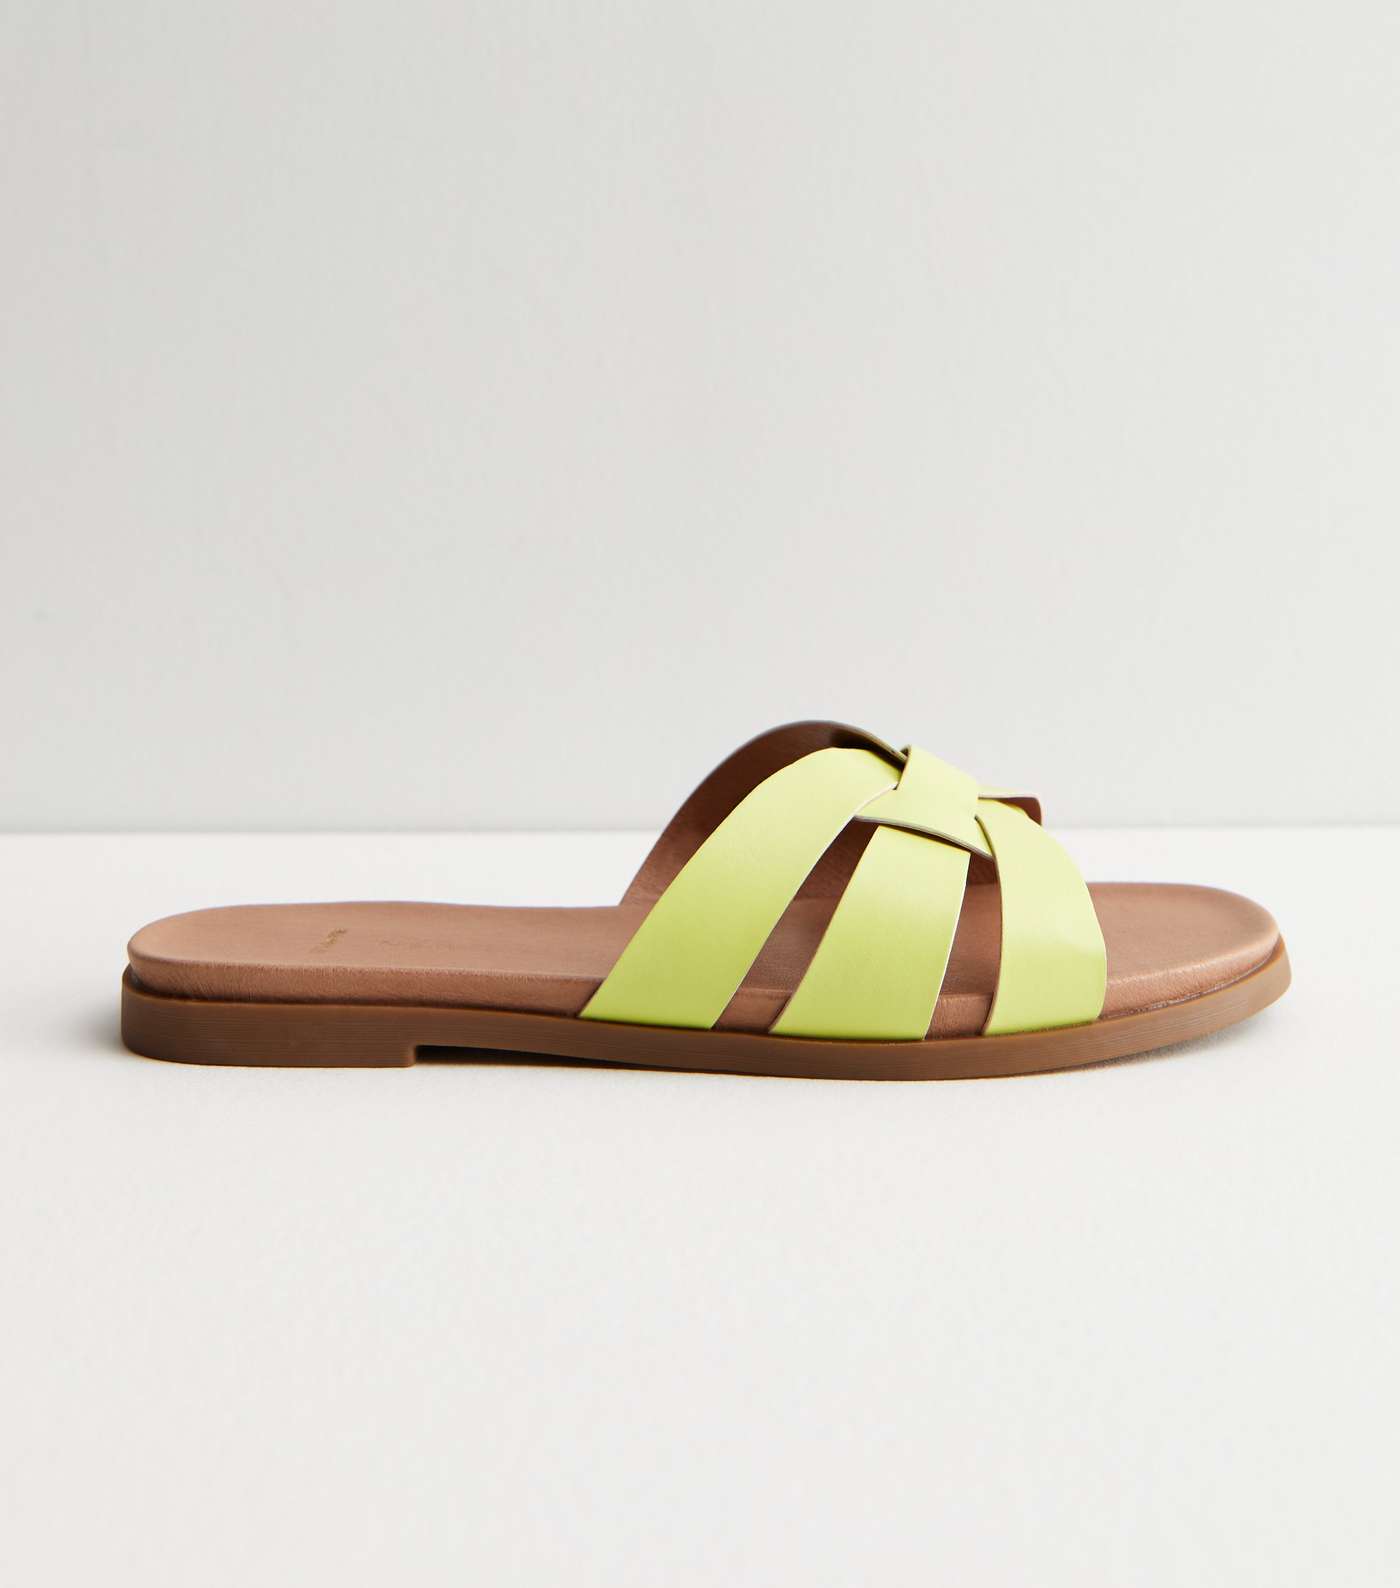 Wide Fit Yellow Cross Strap Sliders Image 3